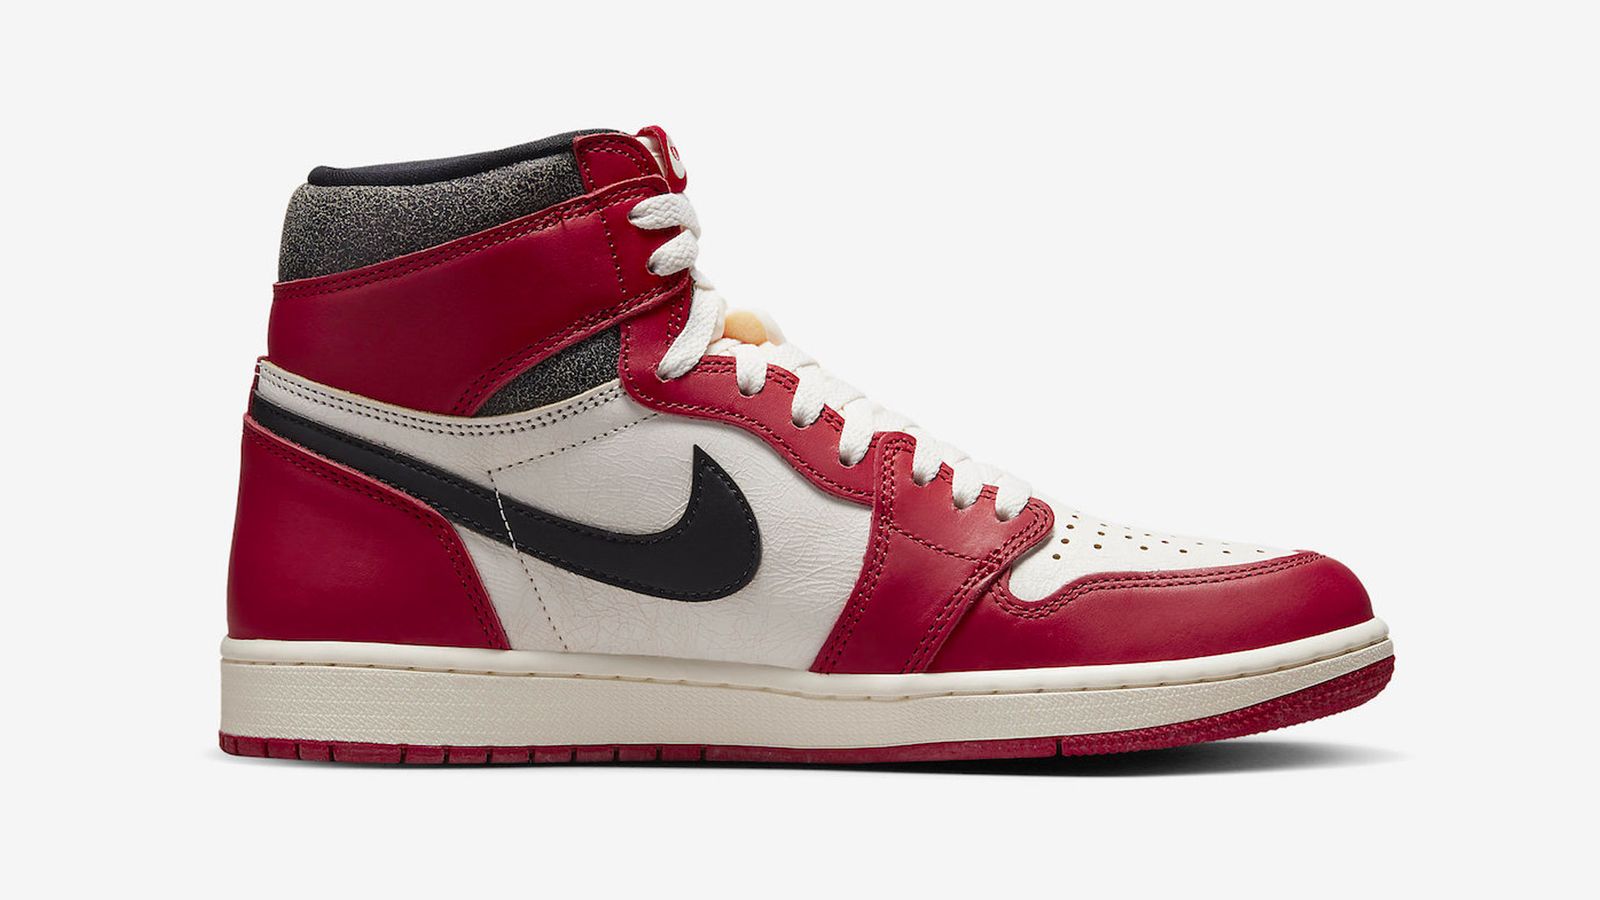 Air Jordan 1 Chicago Reimagined: Release date, price, and where to buy